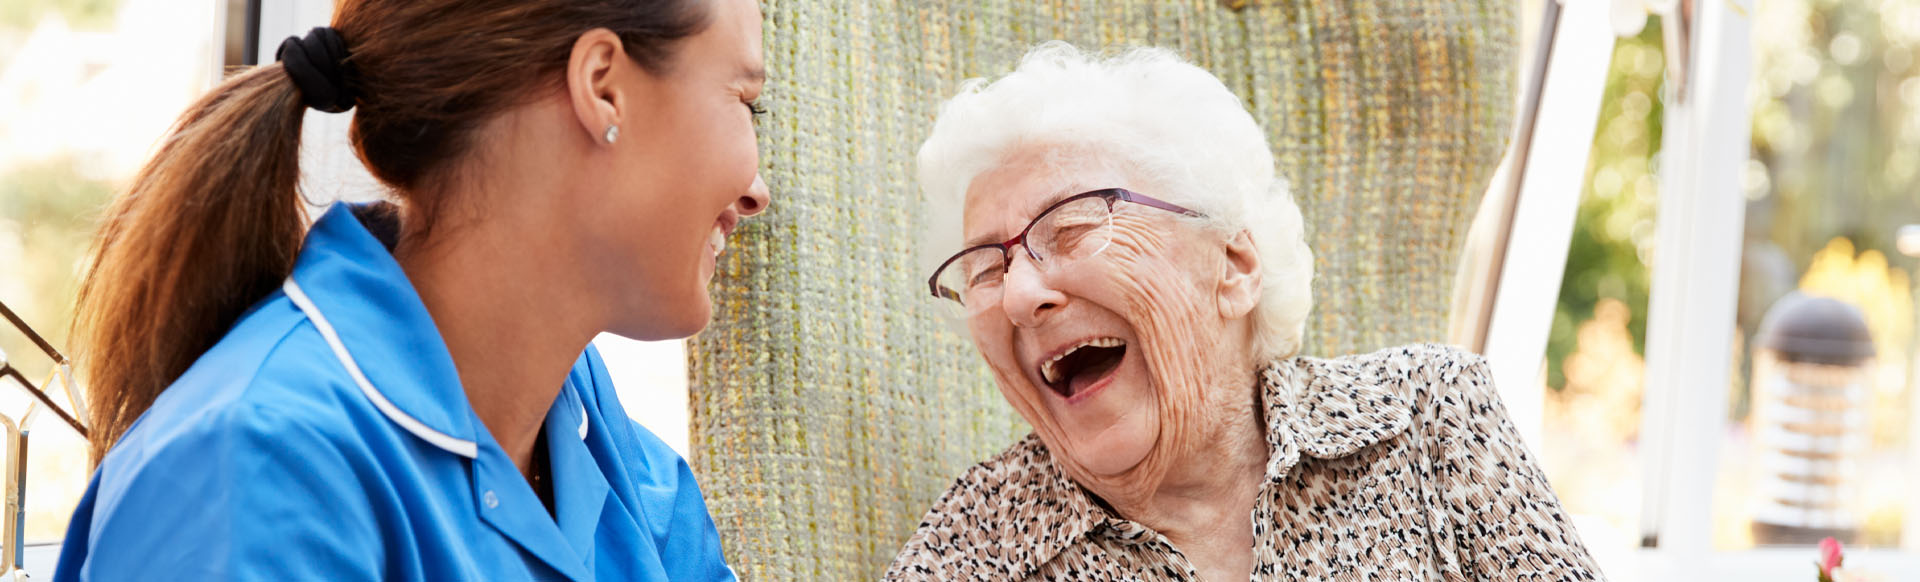 Image showing a nurse laughing with an elderly patient